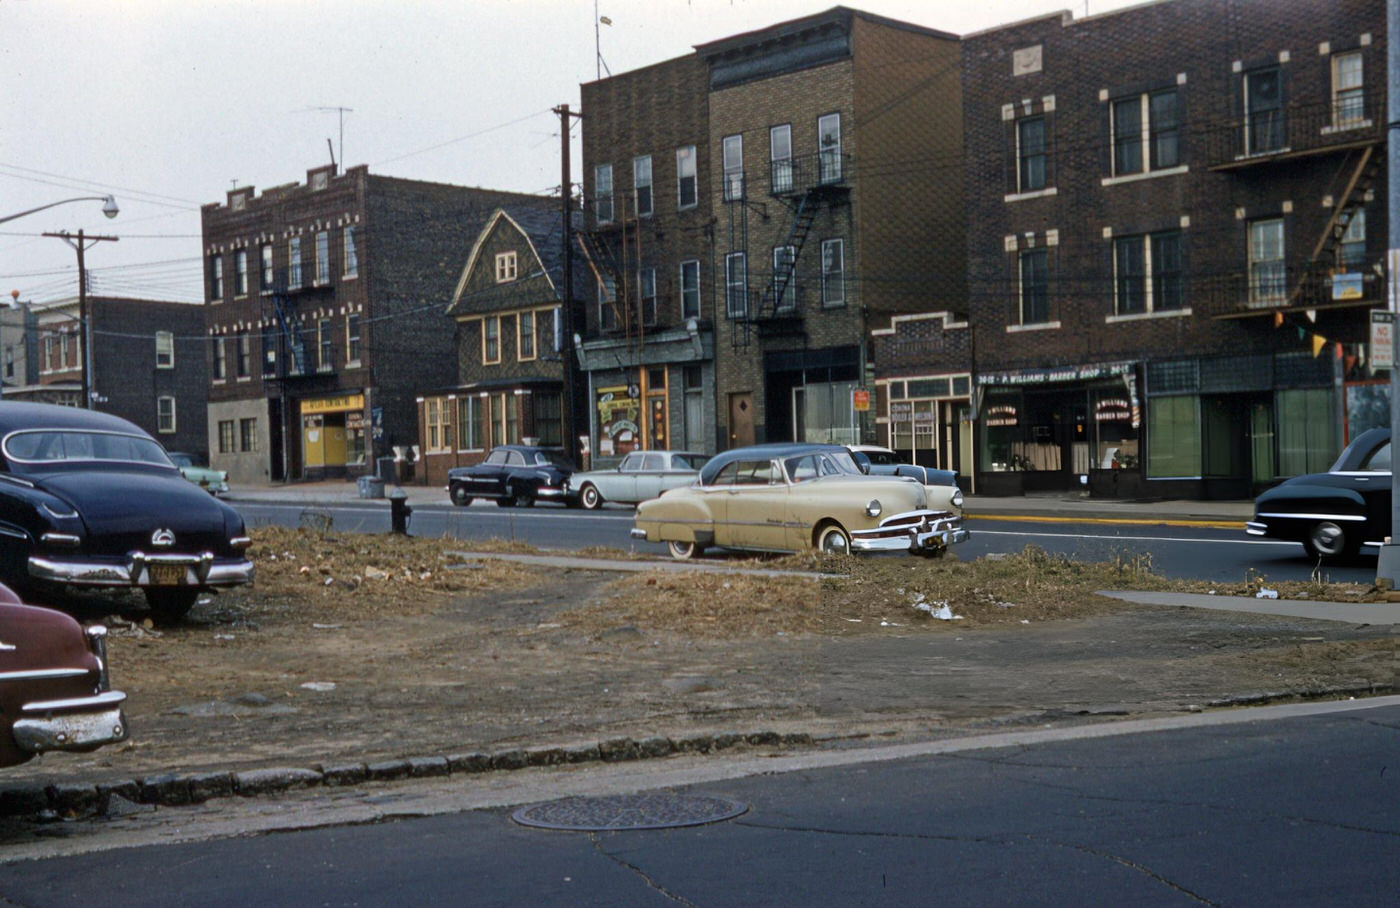 Residential And Commercial Buildings At The Intersection Of 108Th Street And 37Th Avenue, Corona, 1960.